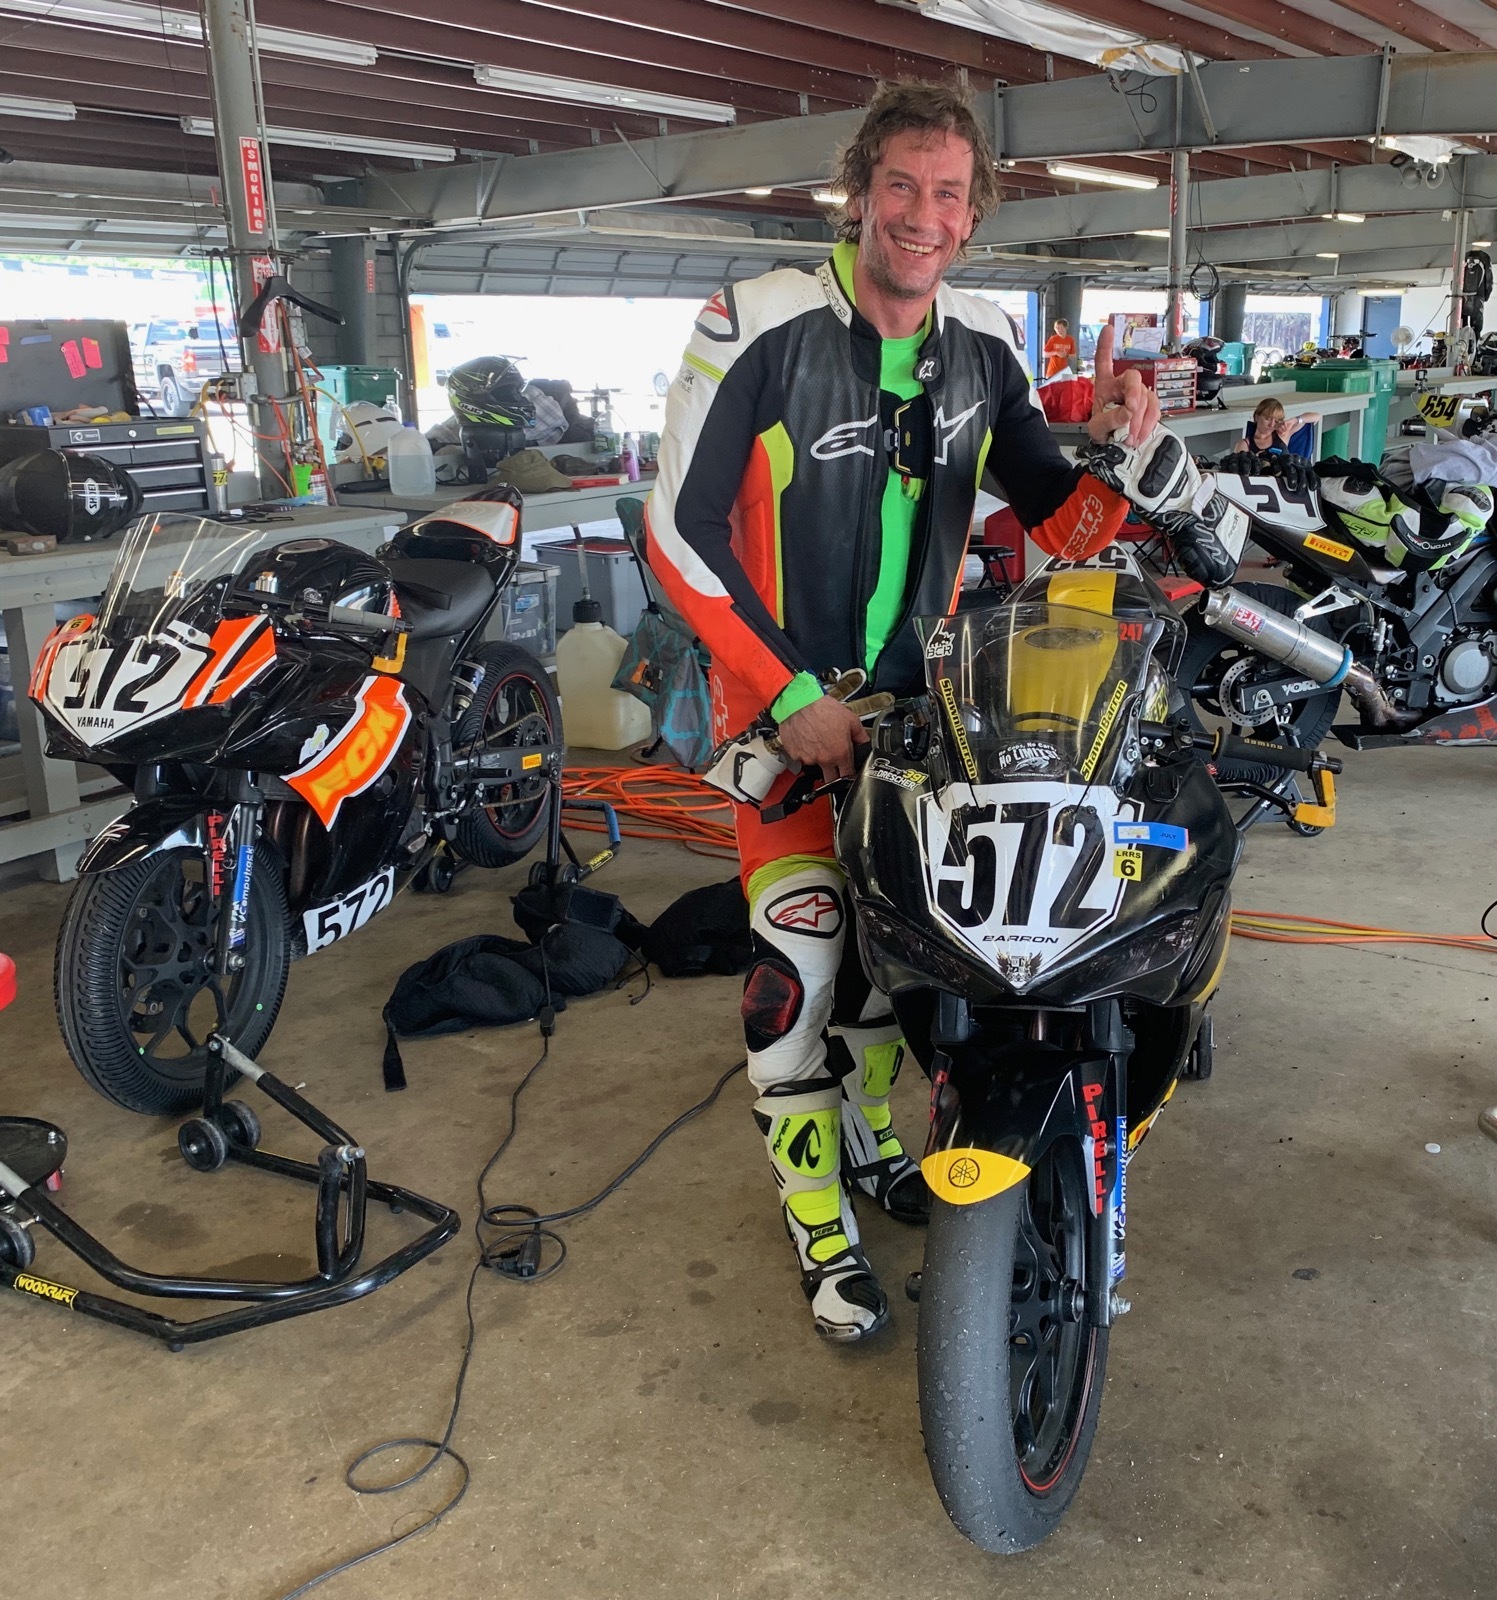 Shawn Barron won the Supersport 300 class of the Loudon Road Racing Series.